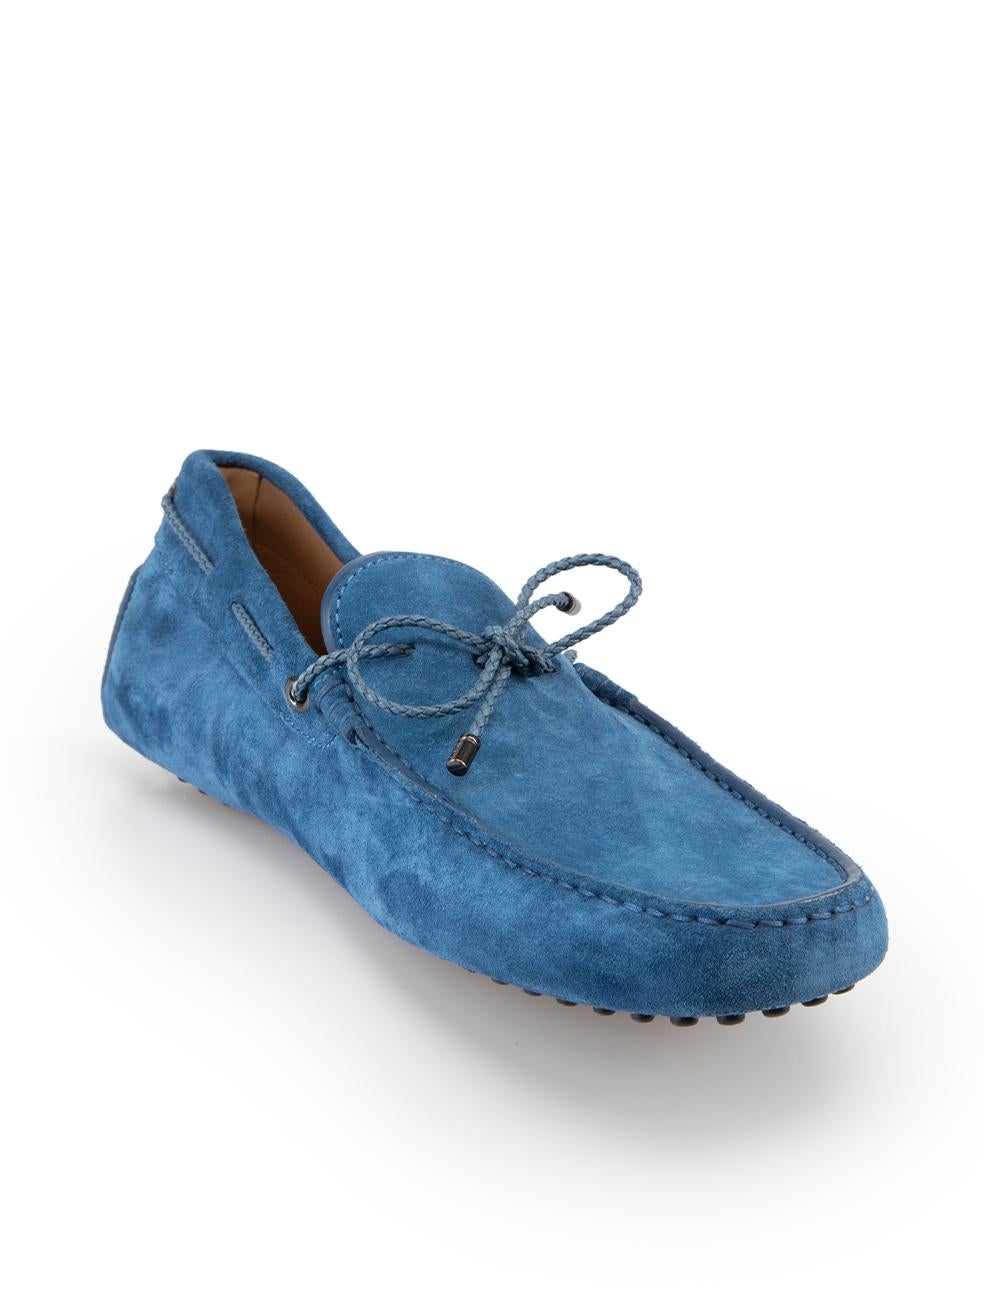 CONDITION is Good. Minor wear to loafers is evident. Light wear along suede on this used Tod's designer resale item



Details


Unisex

Blue

Suede

Slip on loafers

Square toe

Flat heel

Braided bow strap detail





Made in